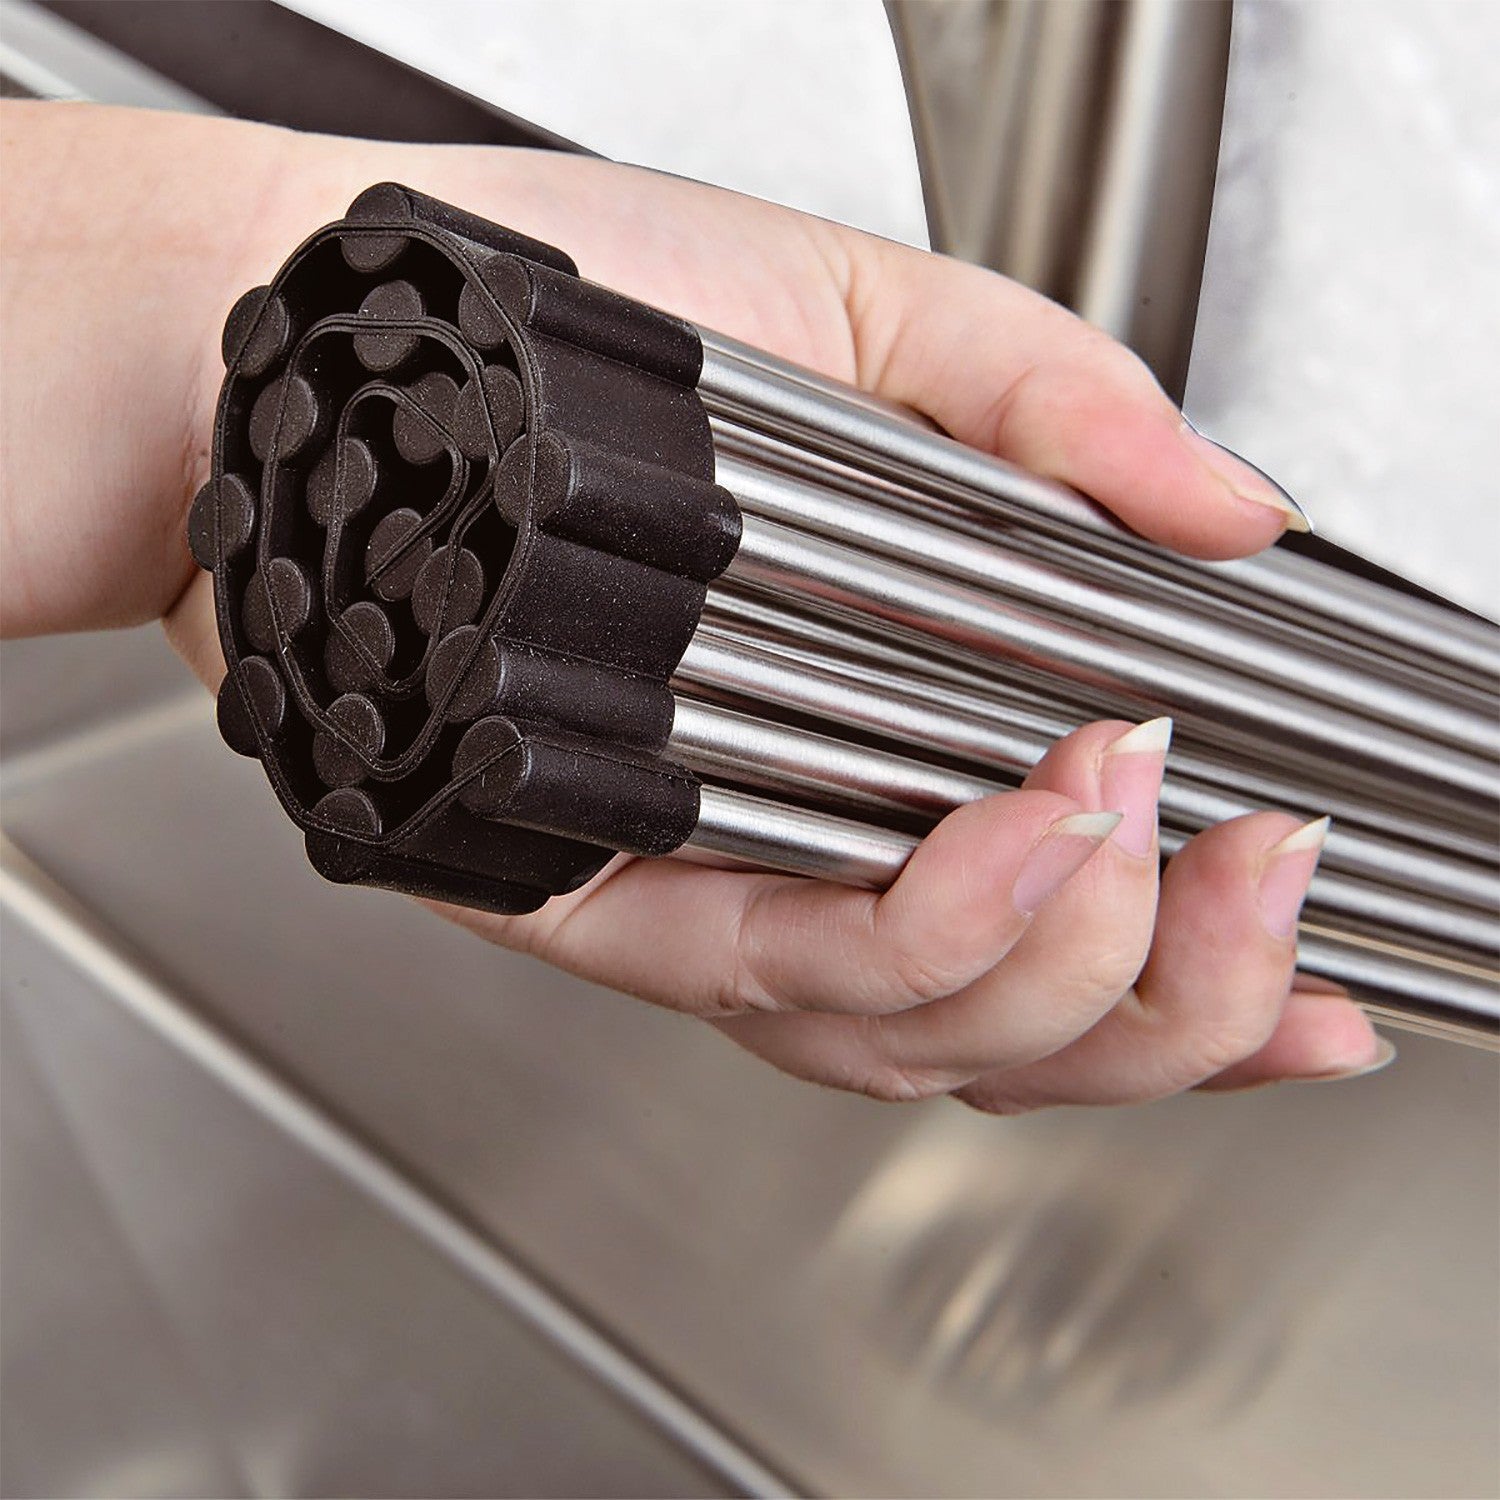 Over The Sink Roll-Up Dish Drying Rack